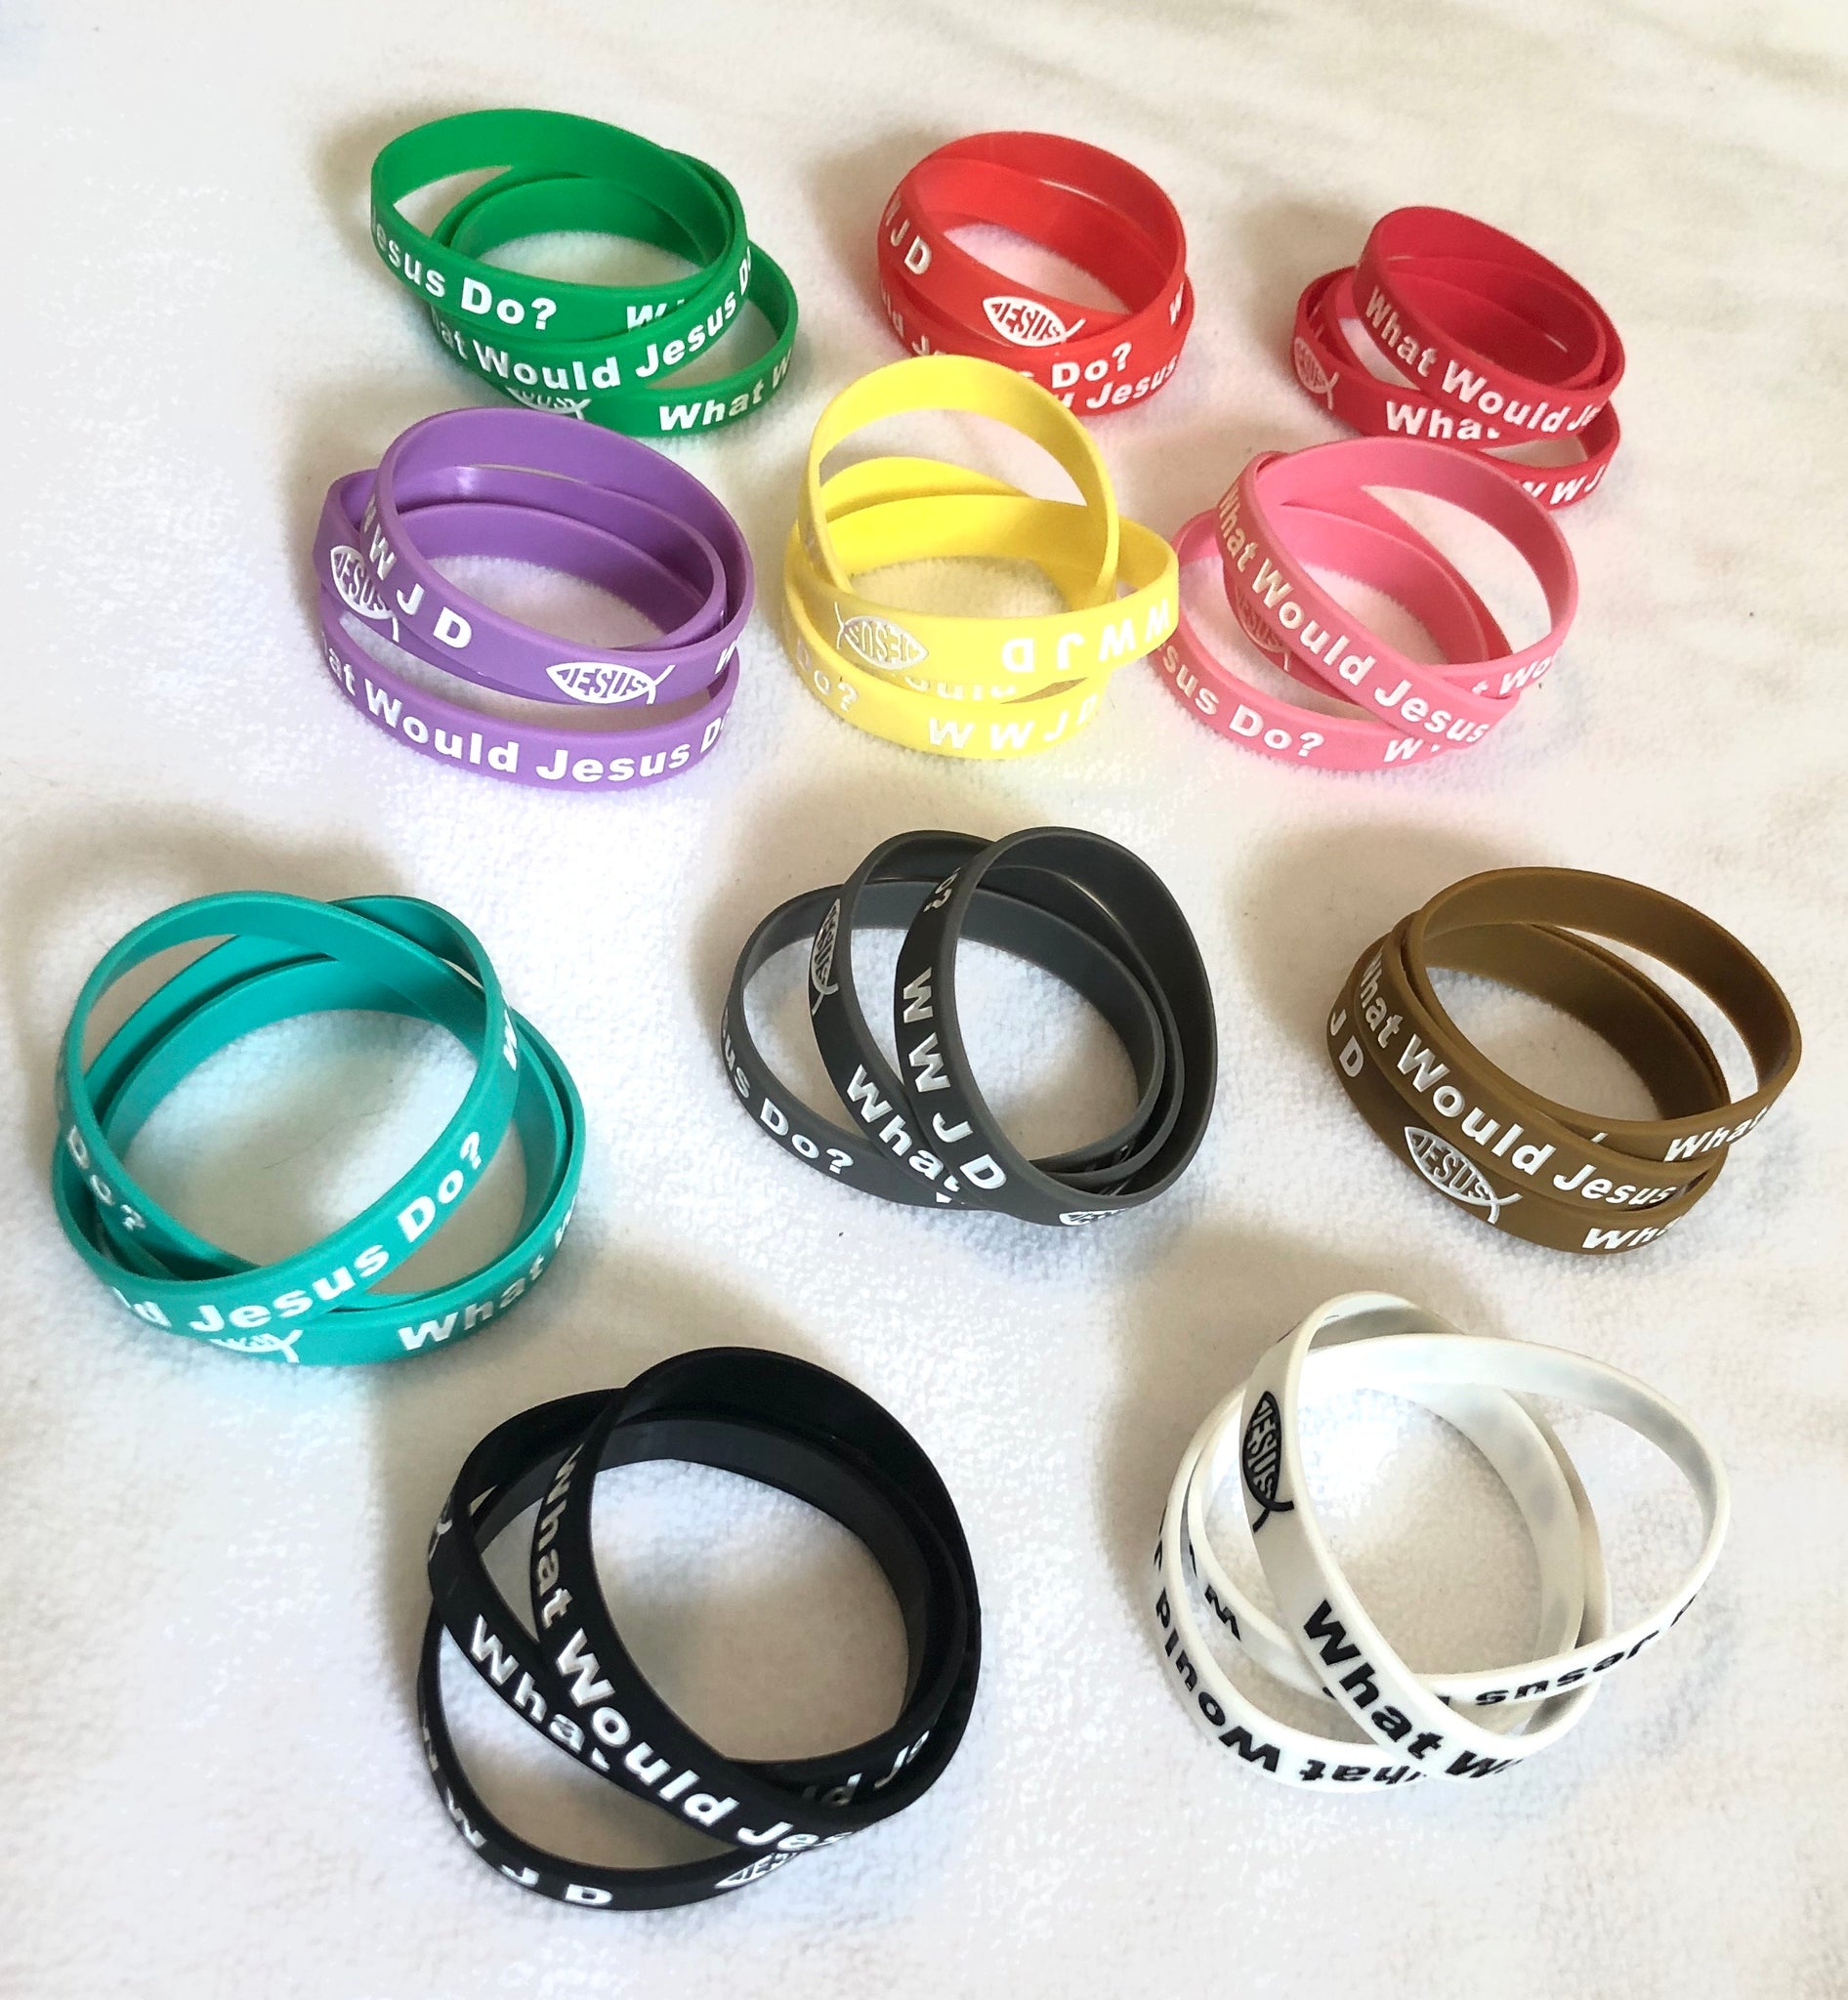 Wholesale Bulk New Design Cheap Gift Items New Silicone Bracelet Wrist Bands  Custom Silicone Wristbands For Sale From malibabacom